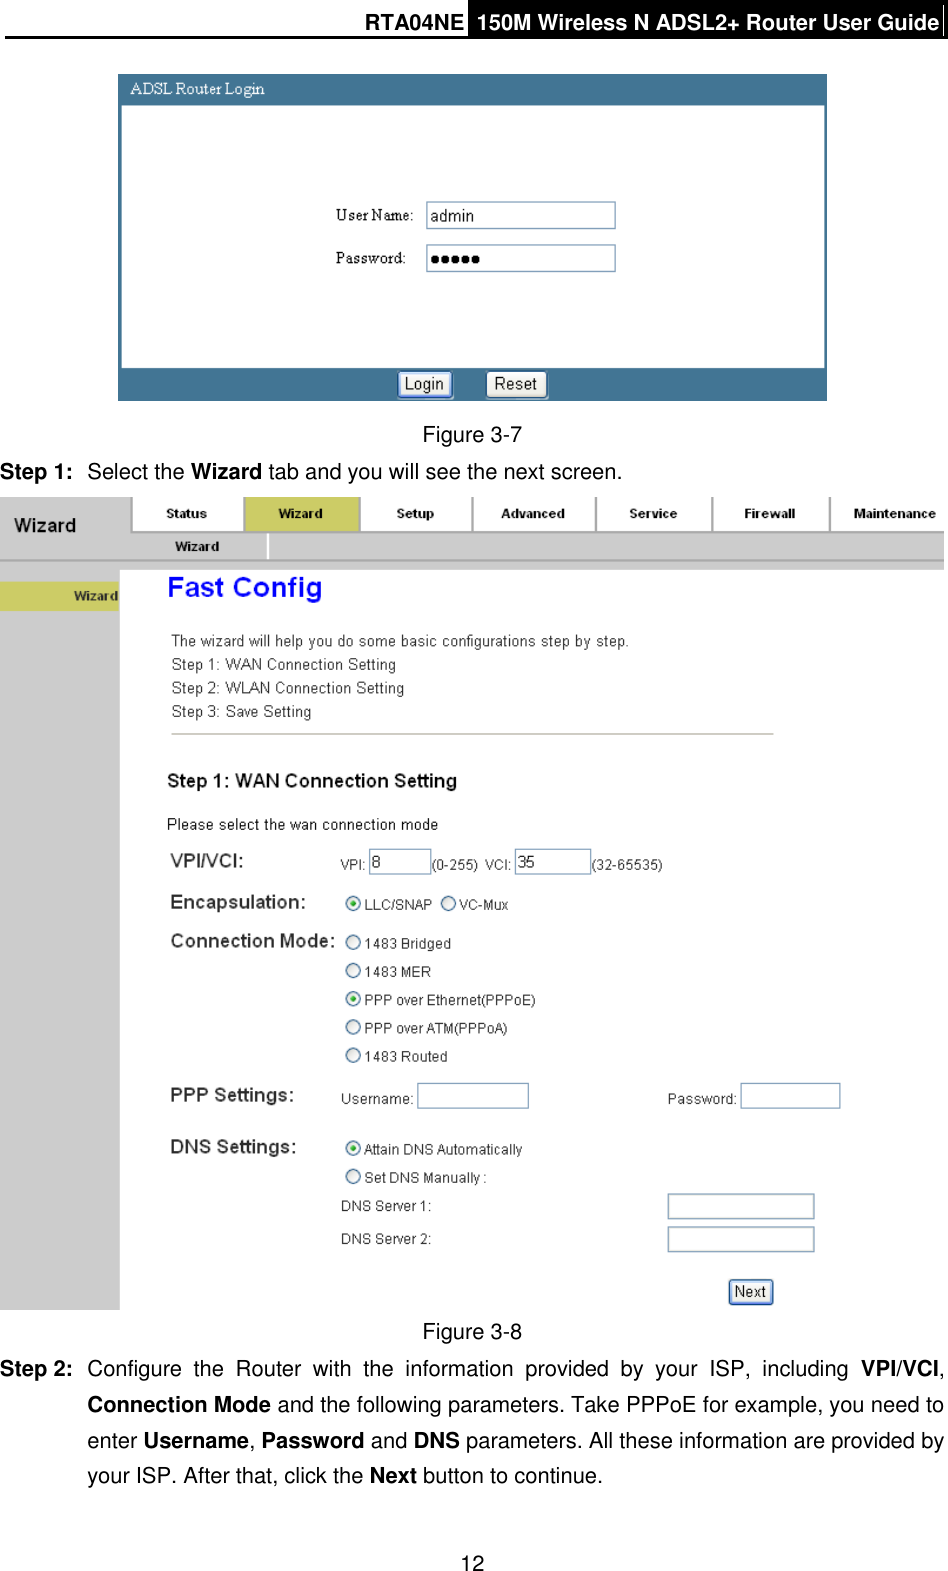 RTA04NE 150M Wireless N ADSL2+ Router User Guide  12  Figure 3-7 Step 1:  Select the Wizard tab and you will see the next screen.    Figure 3-8 Step 2:  Configure  the  Router  with  the  information  provided  by  your  ISP,  including  VPI/VCI, Connection Mode and the following parameters. Take PPPoE for example, you need to enter Username, Password and DNS parameters. All these information are provided by your ISP. After that, click the Next button to continue. 